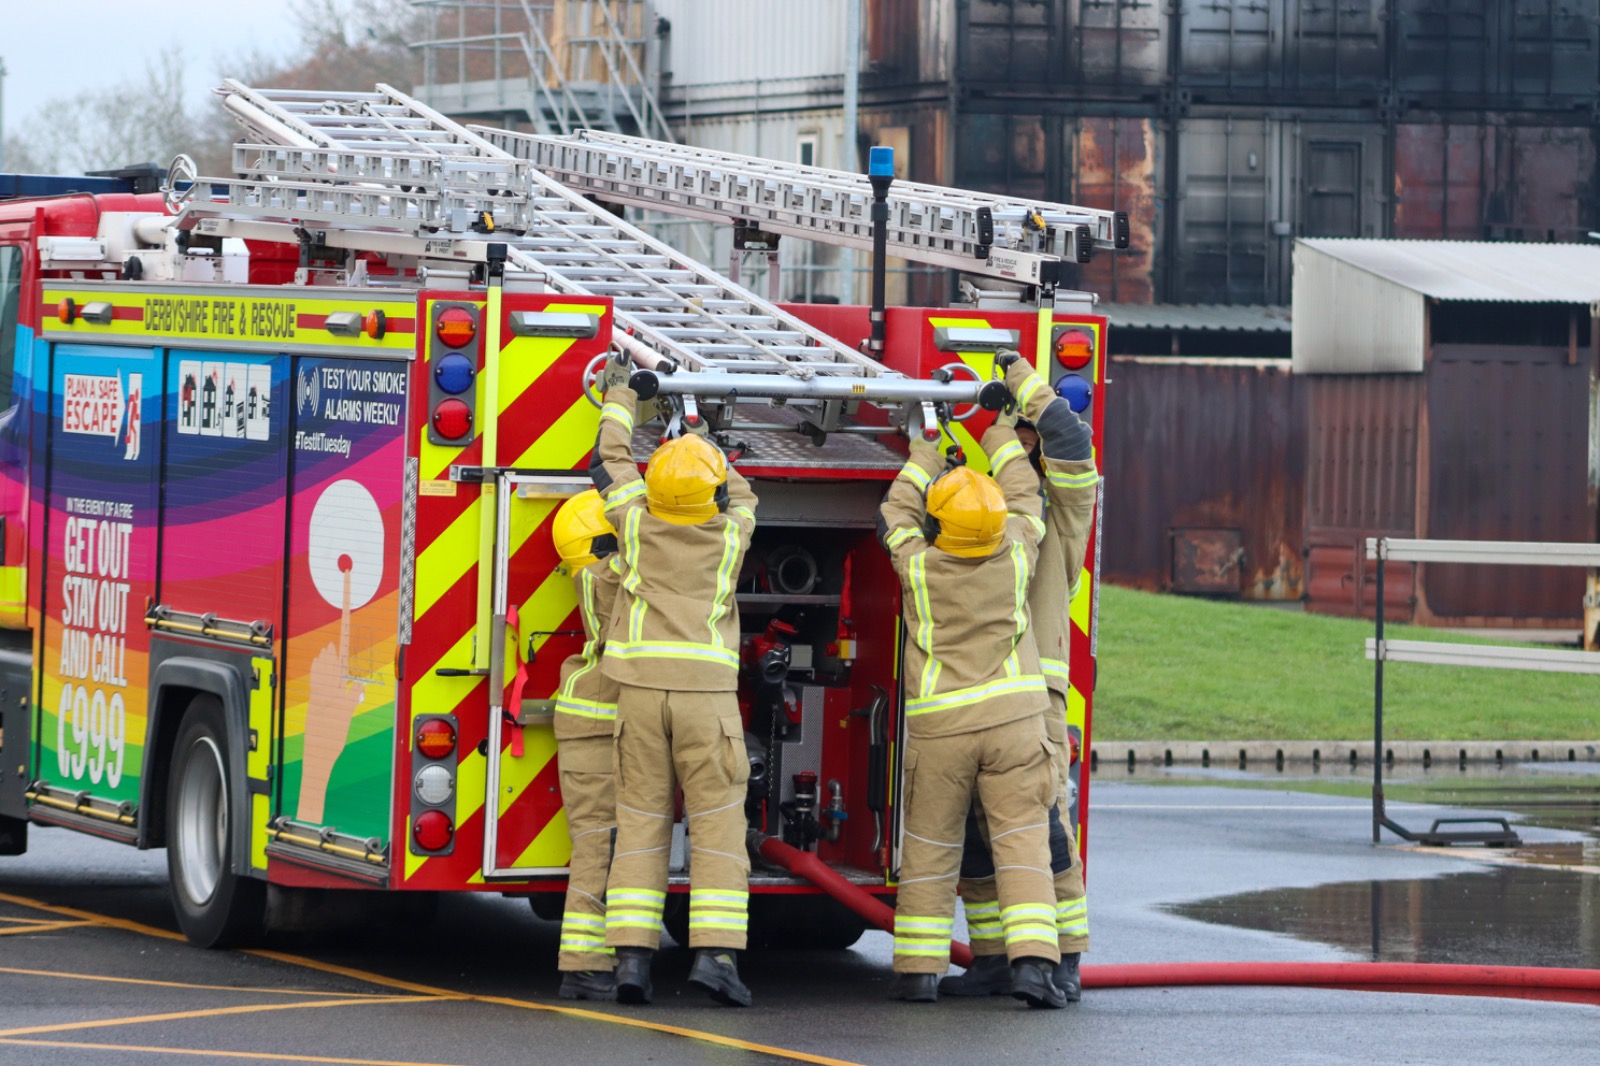 derbyshire fire and rescue, People Insight